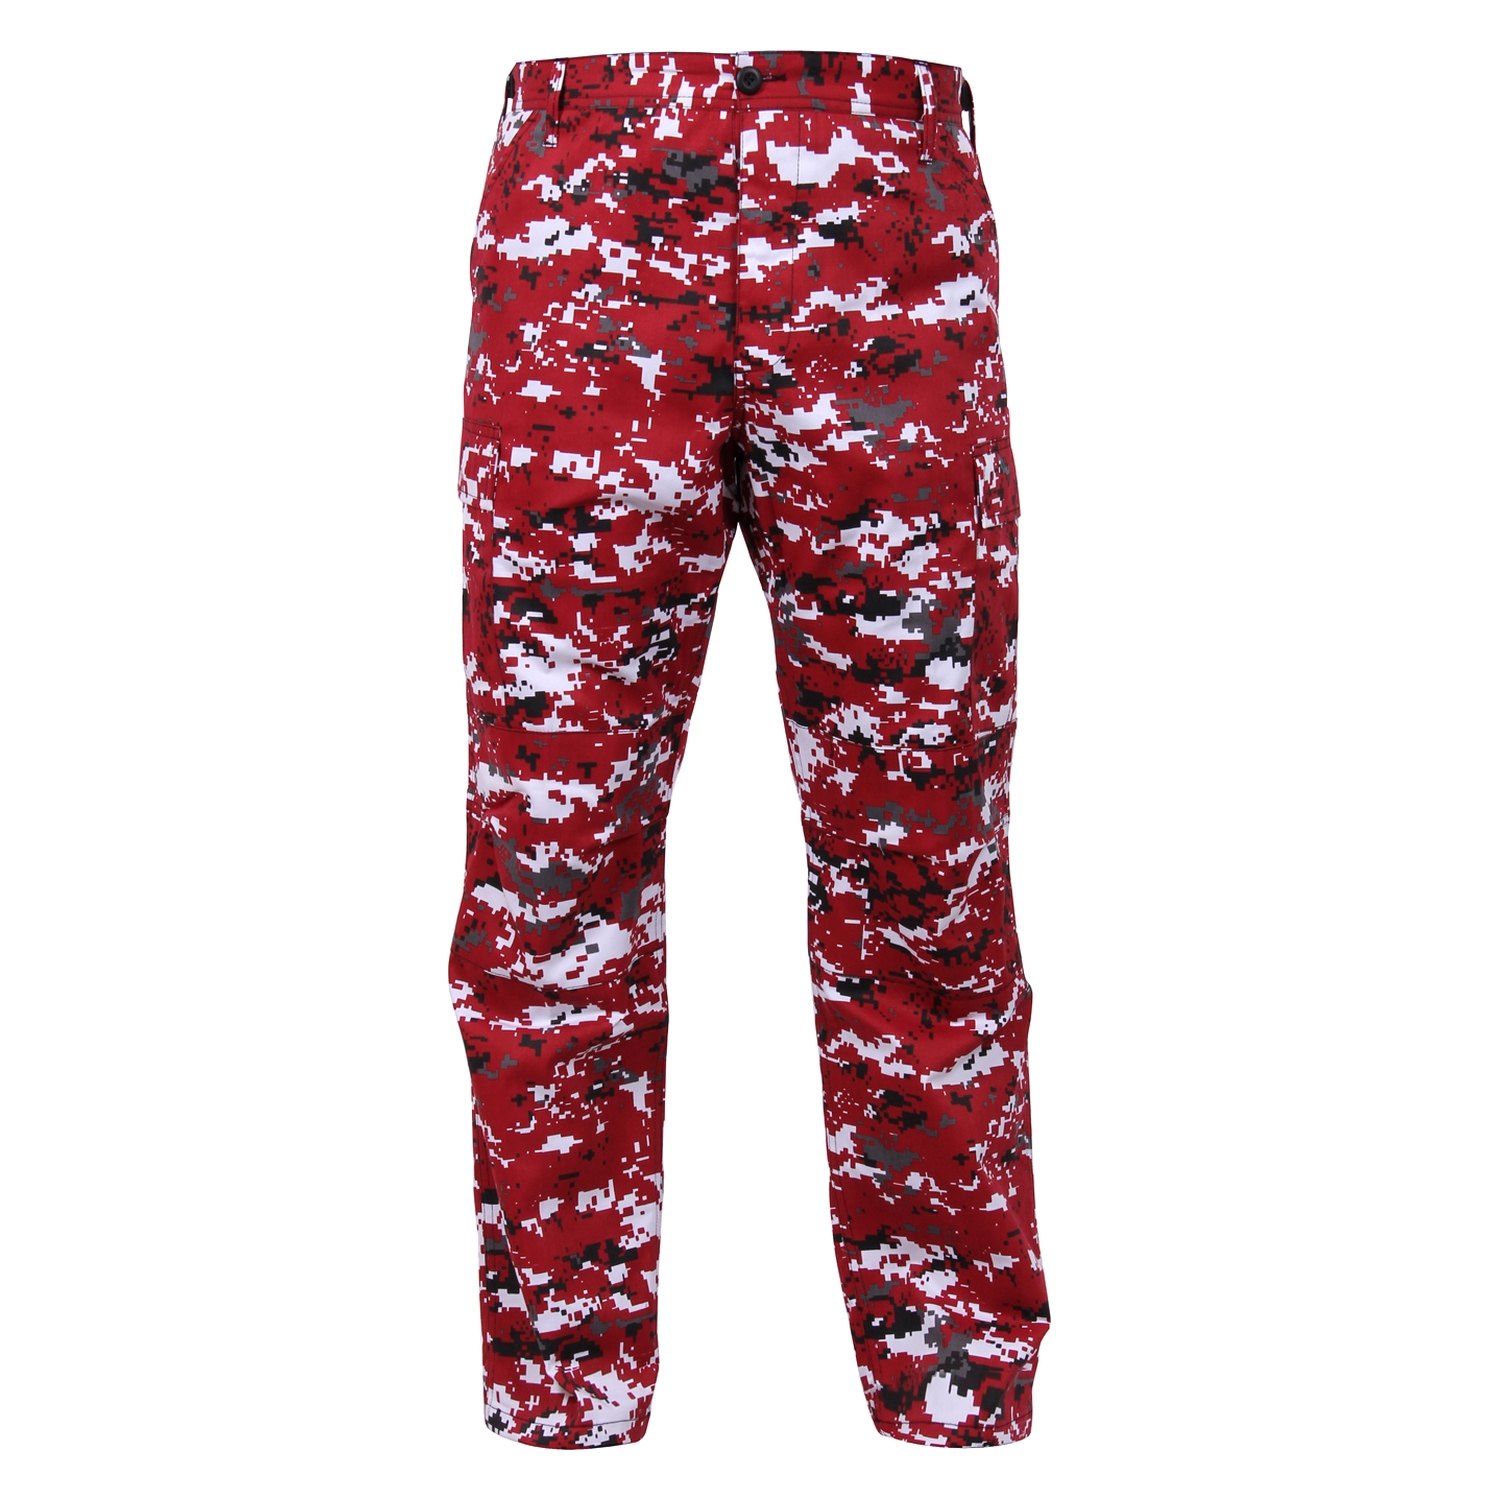 Rothco® 99641 - XX-Large Red Digital Camo Tactical BDU Pants